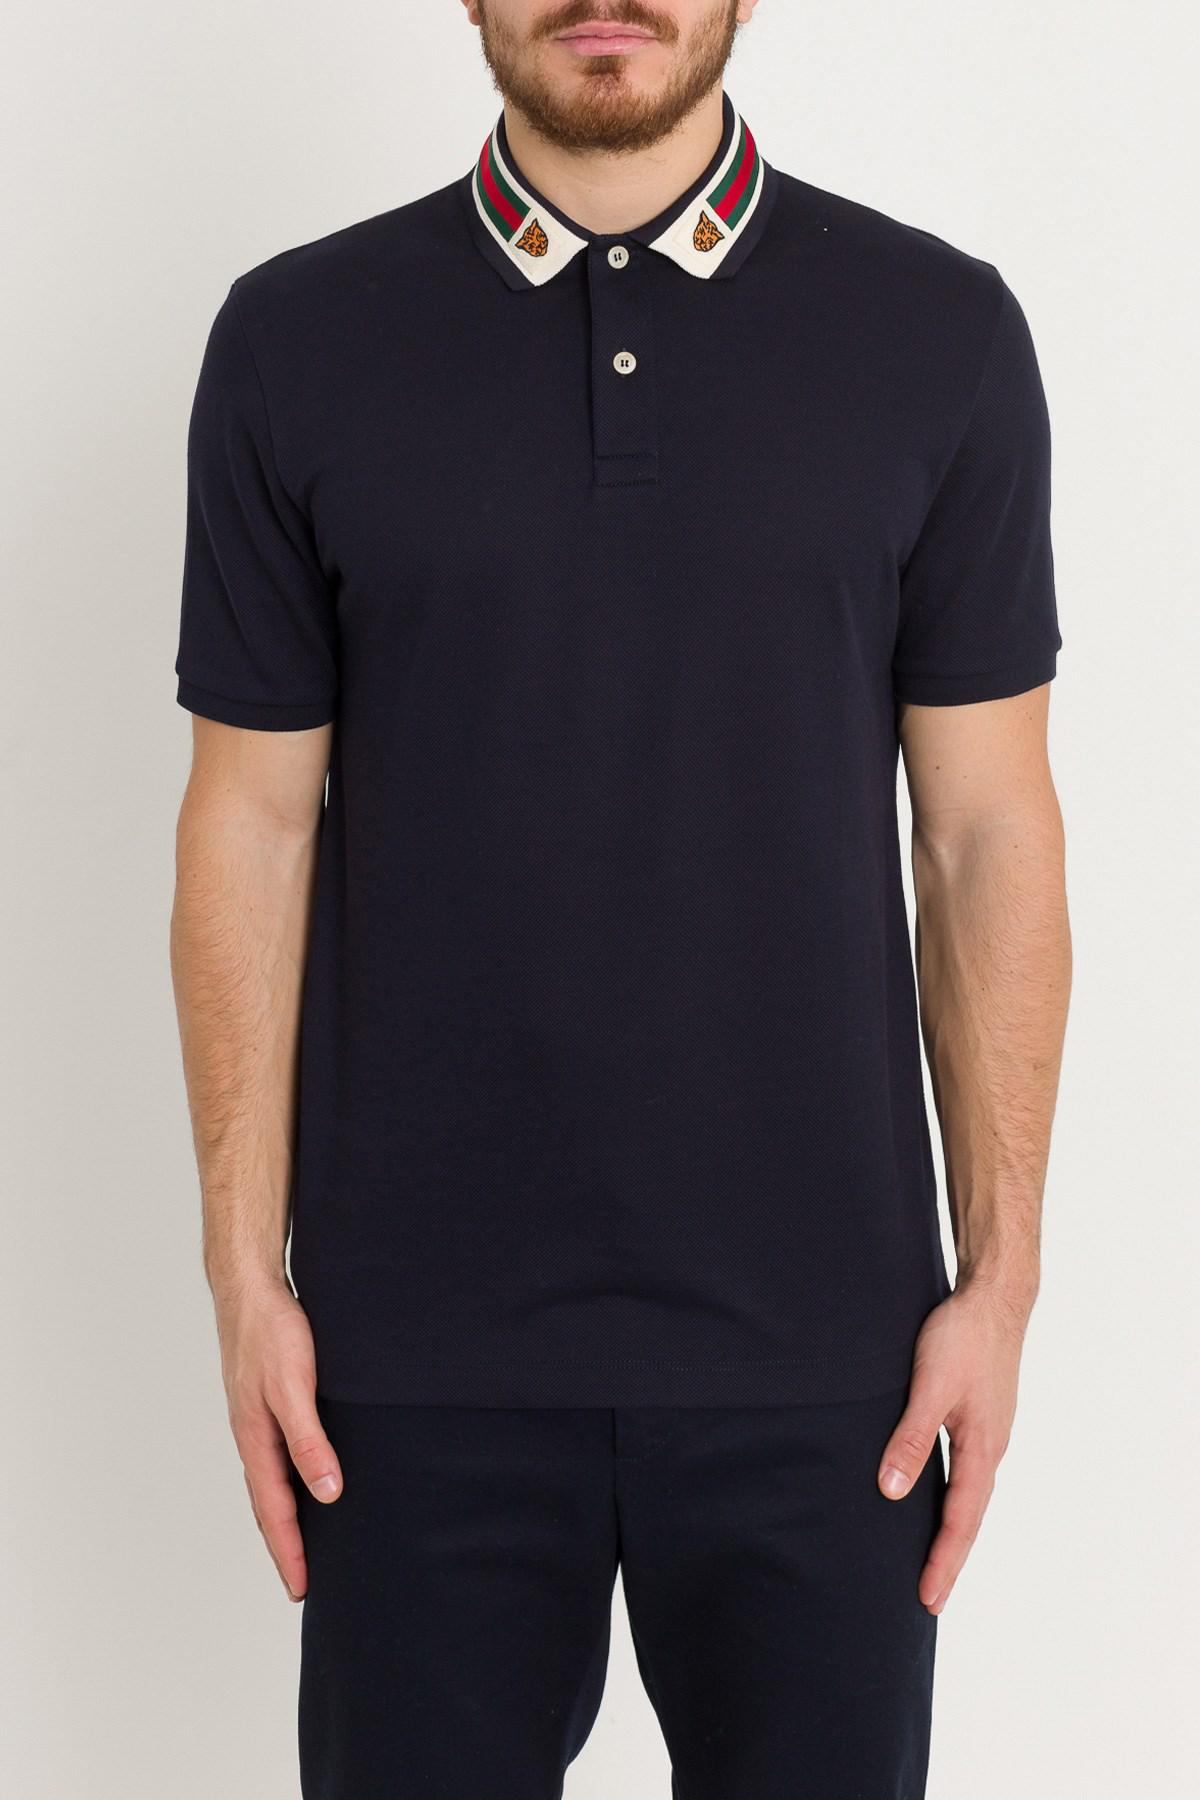 gucci cotton polo with web and feline head